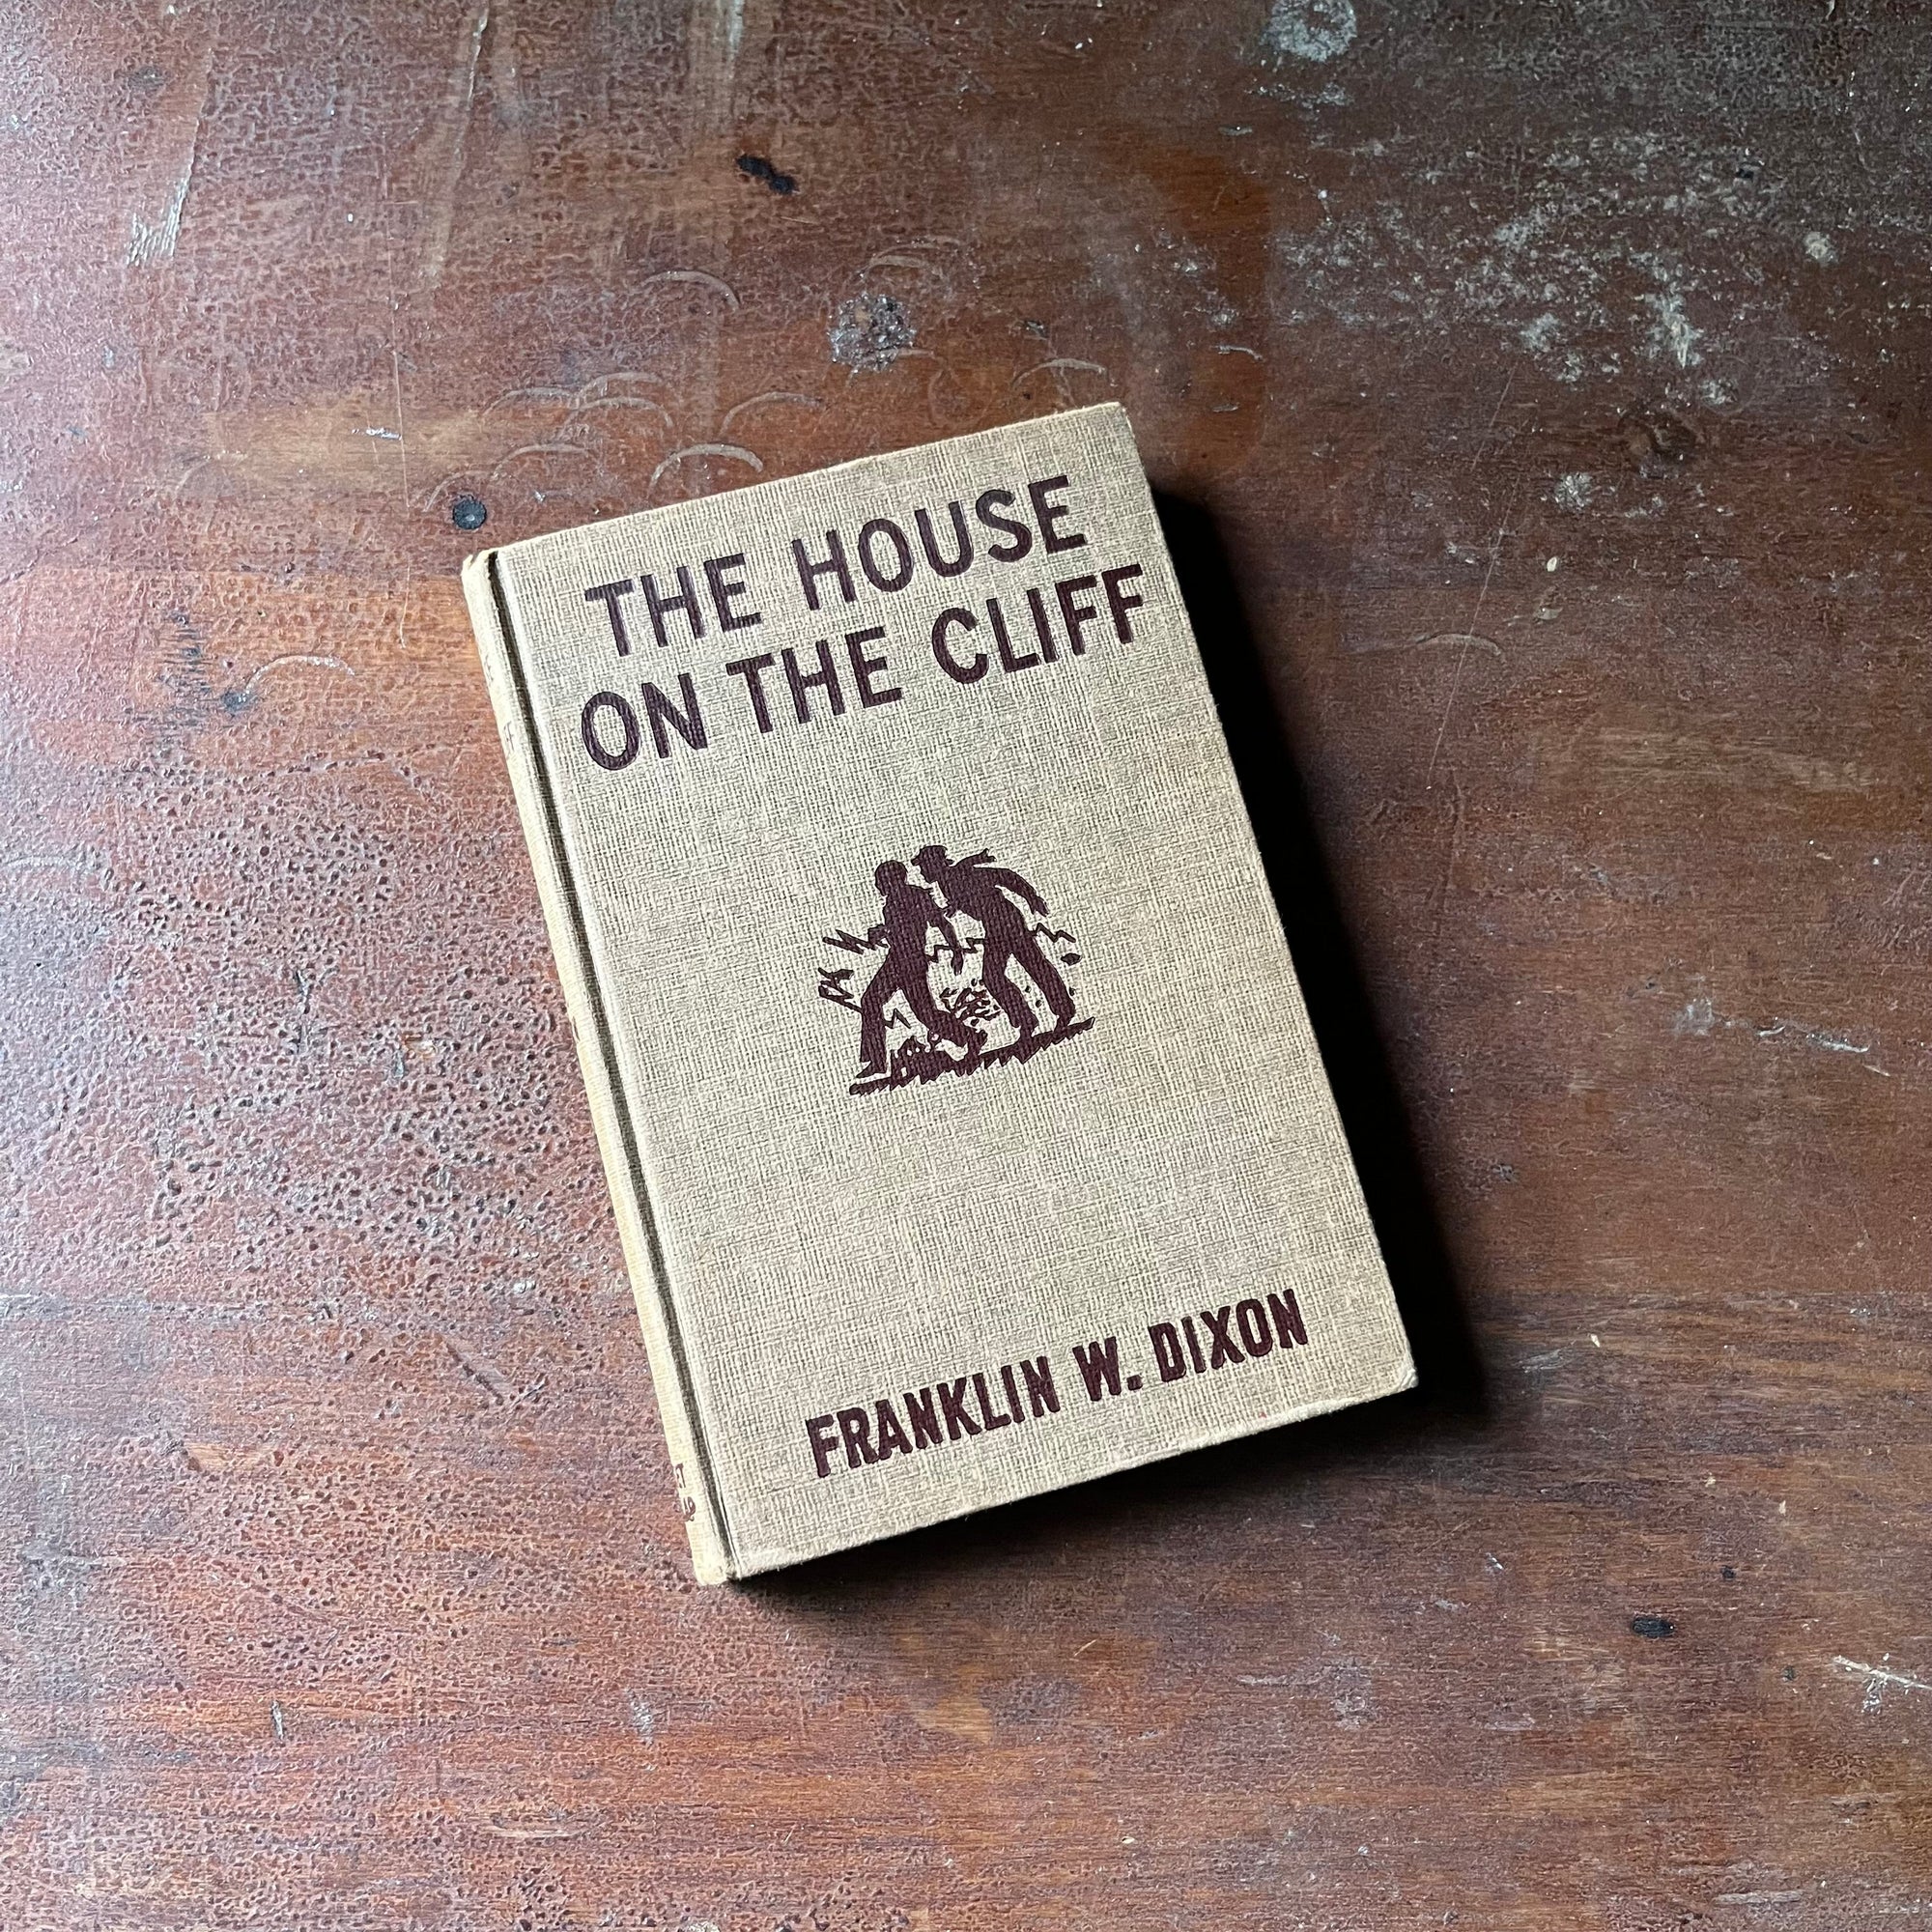 vintage children's chapter book, vintage adventure book for boys, homeschool library - The Hardy Boys Mysteries Book #2:  The House on the Cliff written by Franklin W. Dixon - view of the front cover